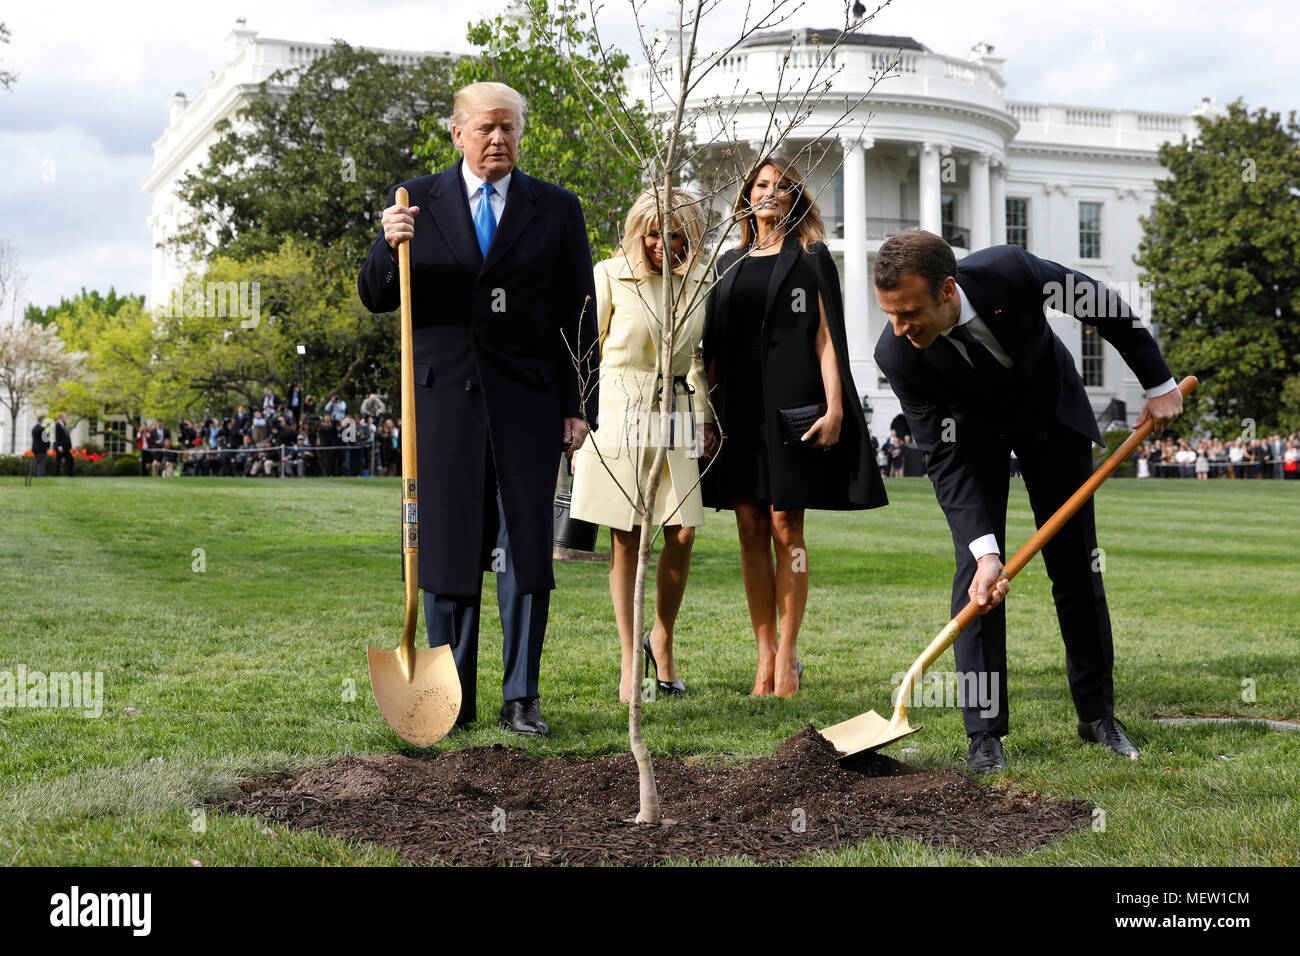 U.S. President Donald Trump with France's president Emmanuel Macron and First Ladies Melania Trump and Brigitte Macron plant a tree, a gift from the President and Mrs. Macron, on the South Lawn of the White House in Washington, DC, U.S., on Monday, April 23, 2018. As Macron arrives for the first state visit of Trump's presidency, the U.S. leader is threatening to upend the global trading system with tariffs on China, maybe Europe too. Credit: Yuri Gripas/Pool via CNP /MediaPunch Stock Photo